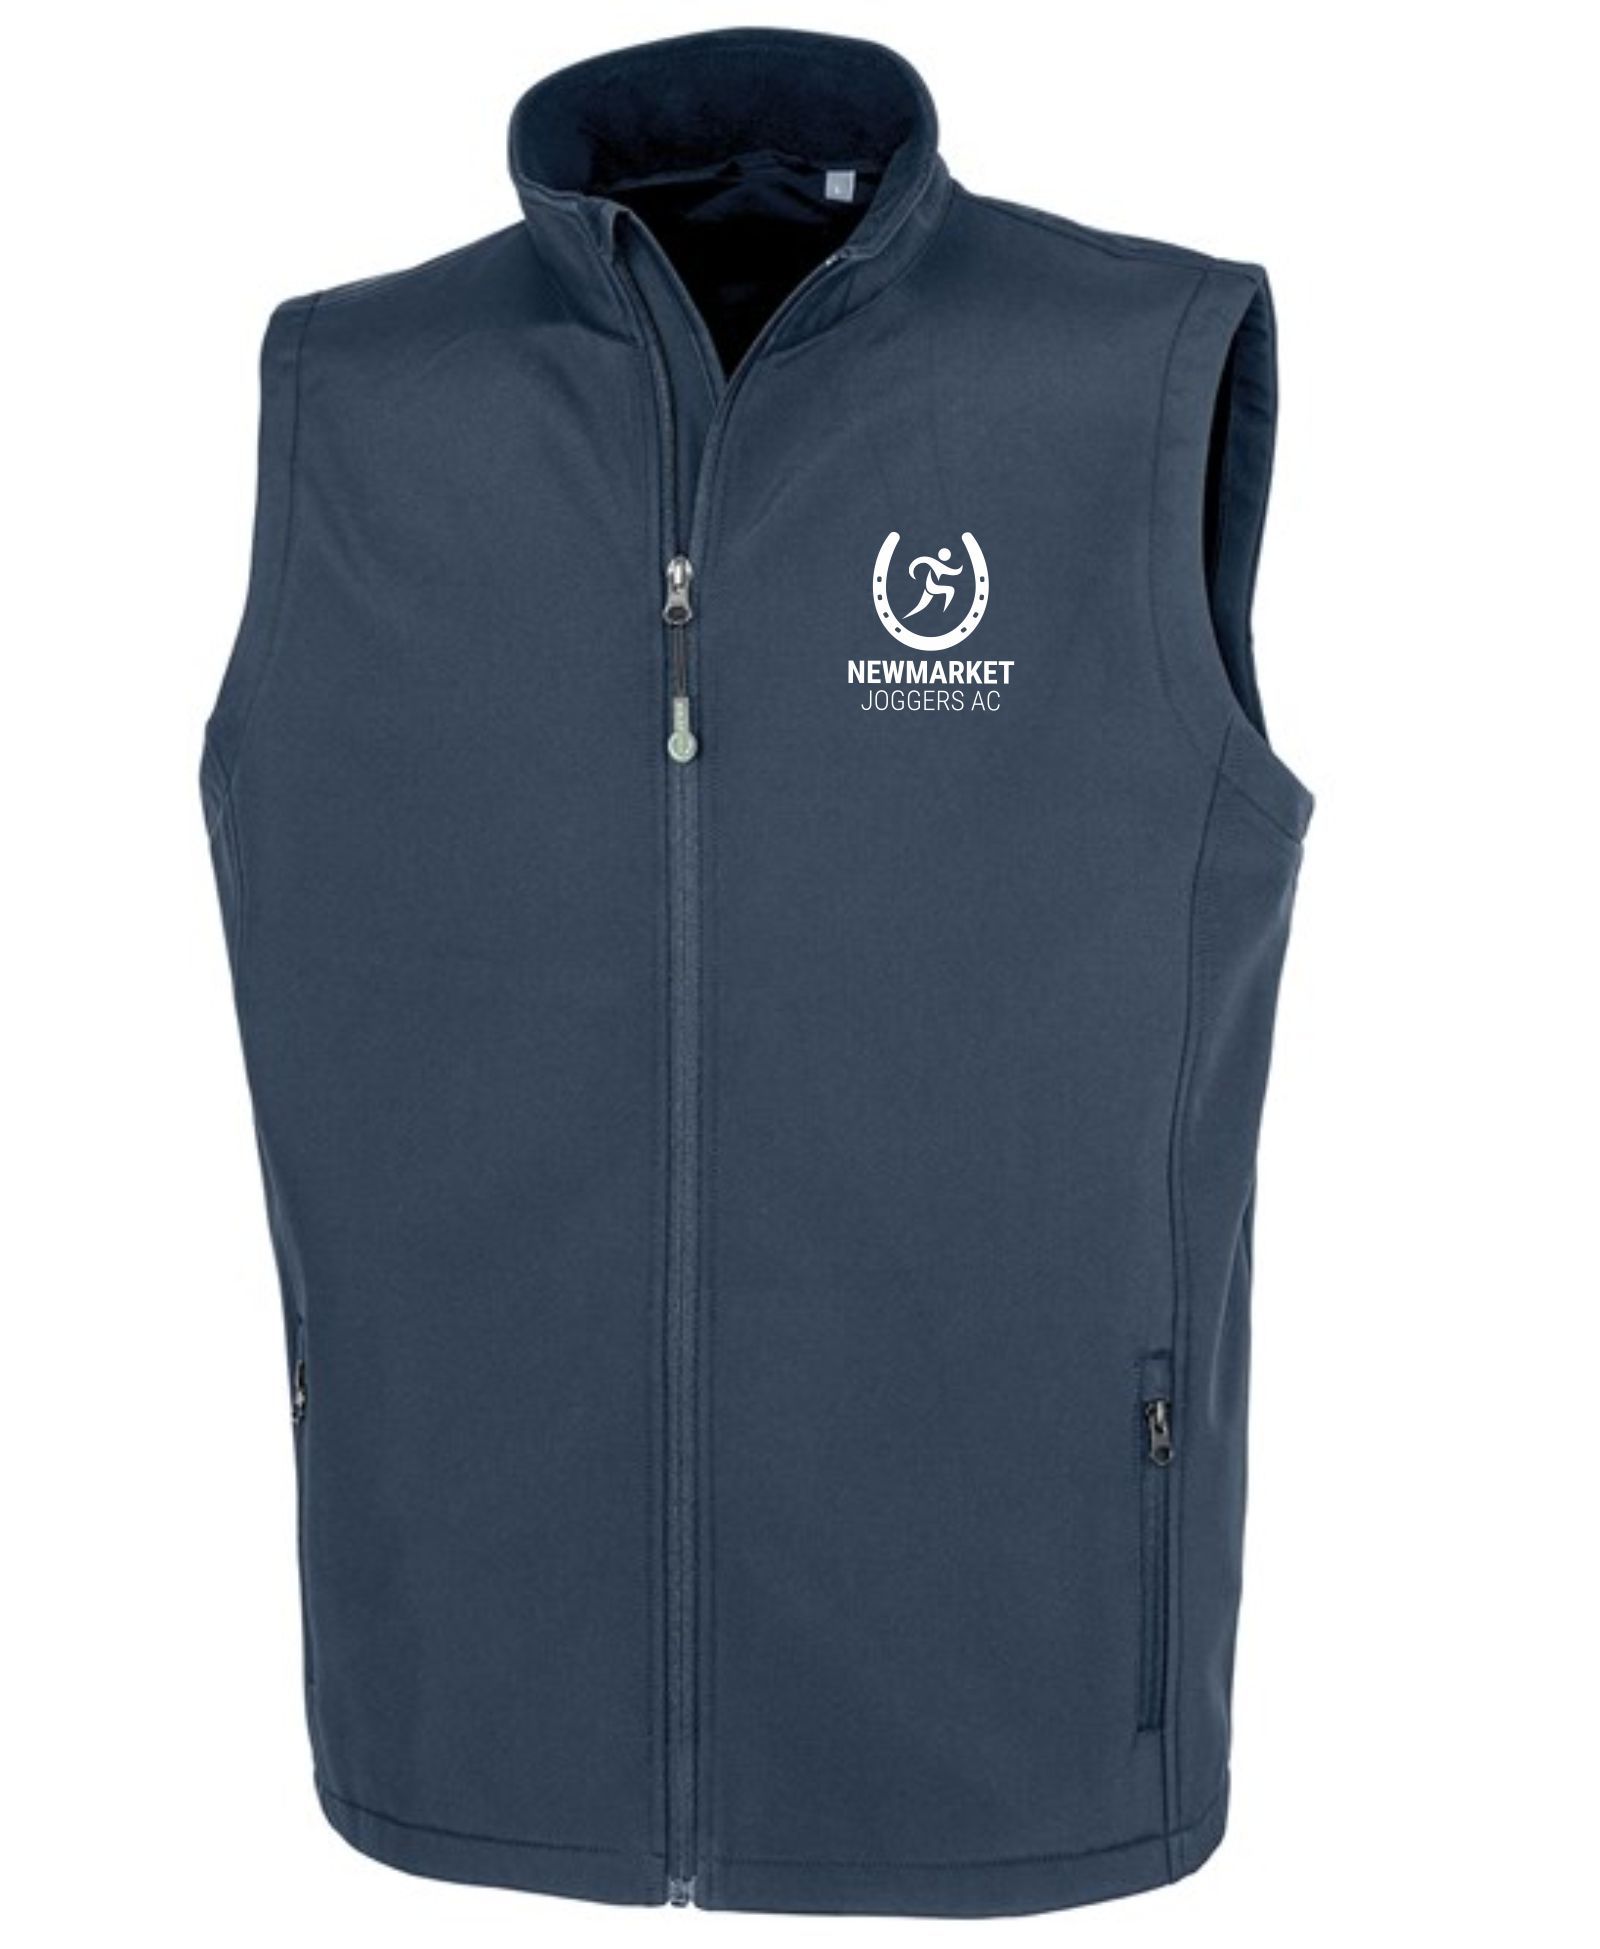 Newmarket Joggers – Outerwear Softshell gilet (Unisex)